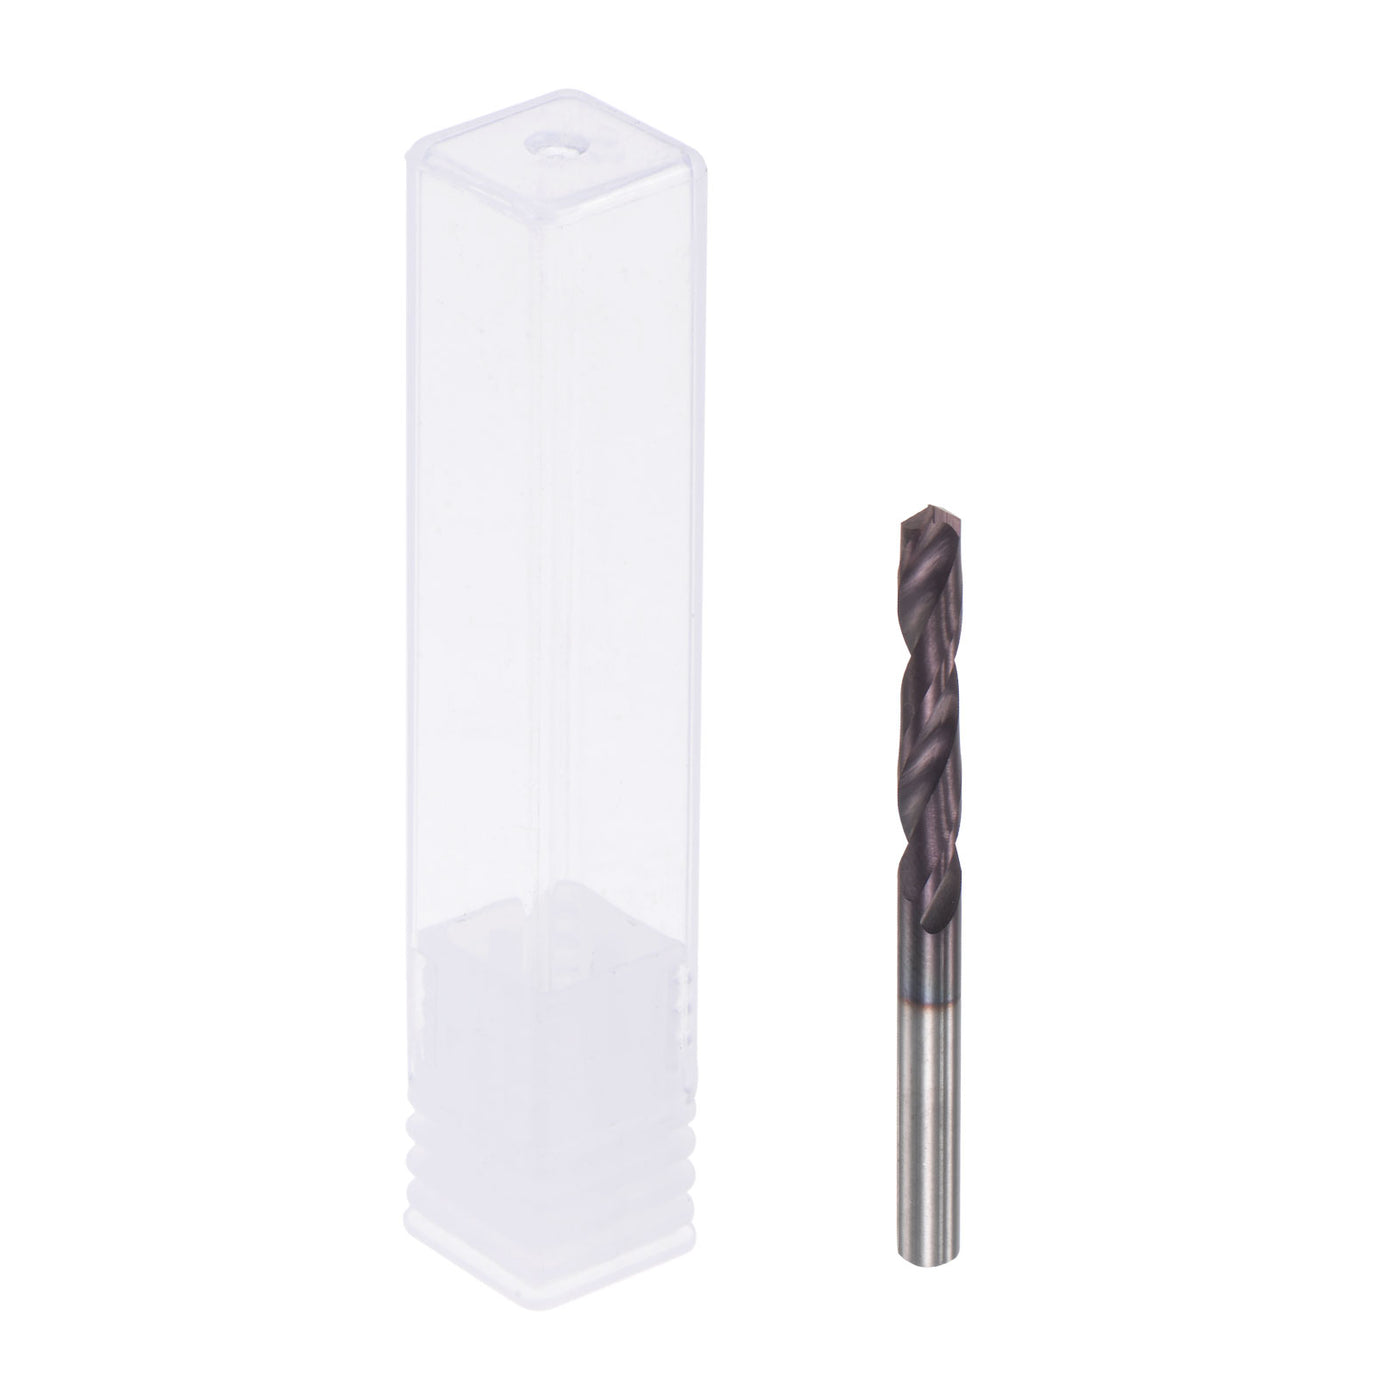 uxcell Uxcell 3.6mm DIN K45 Tungsten Carbide AlTiSin Coated Drill Bit for Stainless Steel